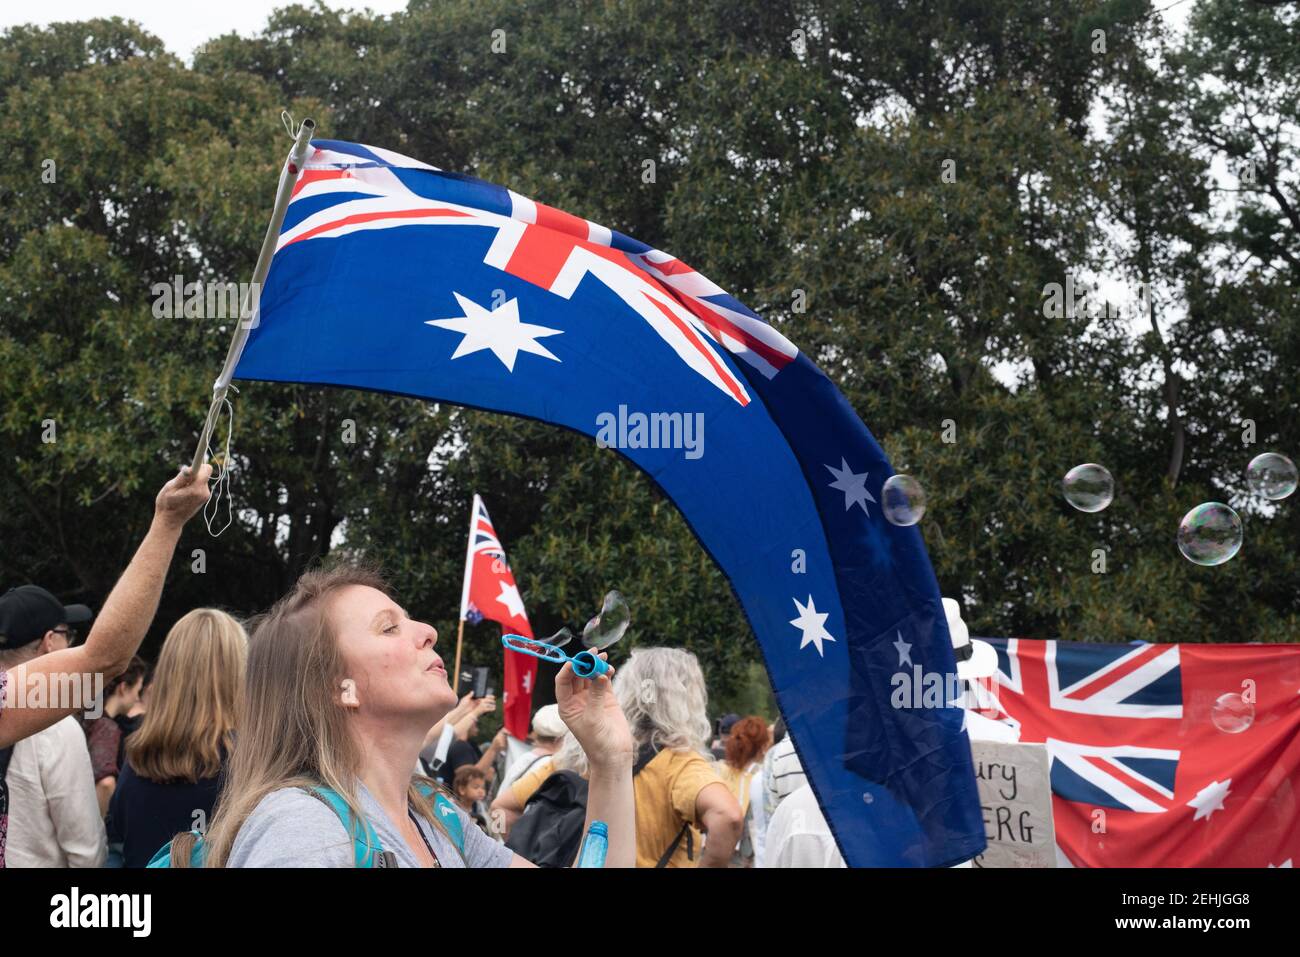 Melbourne, Australia. 20th Feb 2021. Anti-vaccination protesters gather in Fawkner Park to condemn the coronavirus jab in the name of medical freedom. Organisers stated that ‘millions’ will be marching Australia-wide at eleven different locations, although that number may be massively exaggerated. February 20, 2021. Melbourne, Australia. Credit: Jay Kogler/Alamy Live News Stock Photo